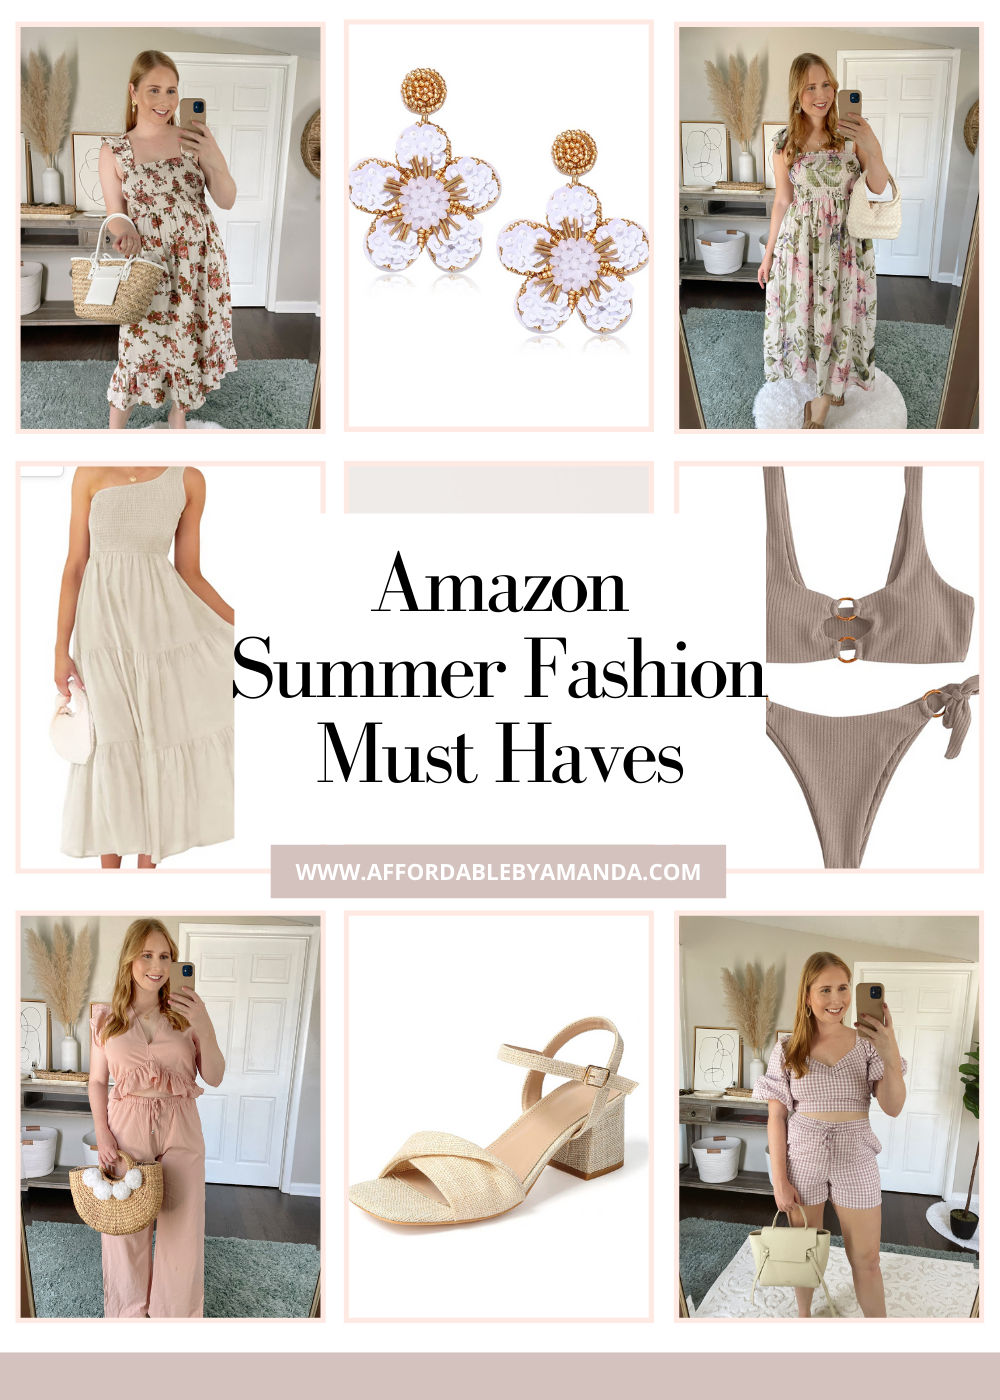 Amazon Summer Fashion Must Haves - Affordable by Amanda